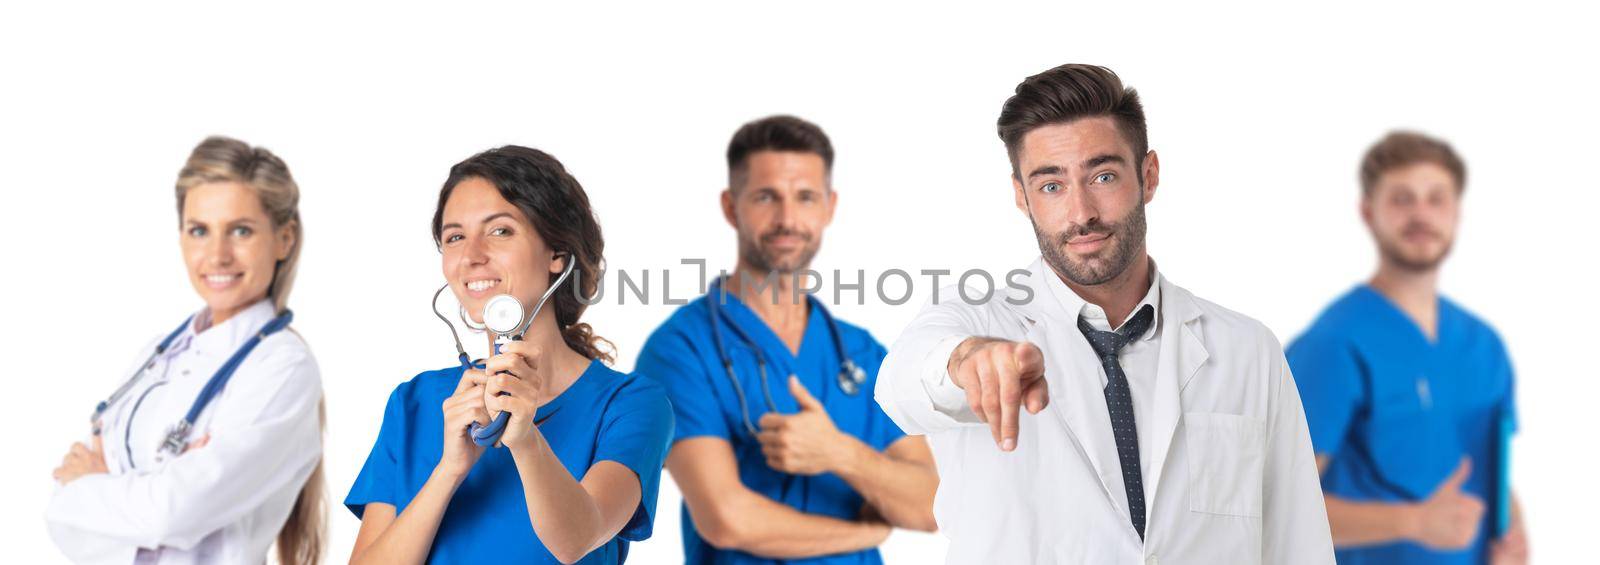 Group of medical doctors and surgeons people over white isolated background Pointing to you and camera with fingers, smiling positive and cheerful